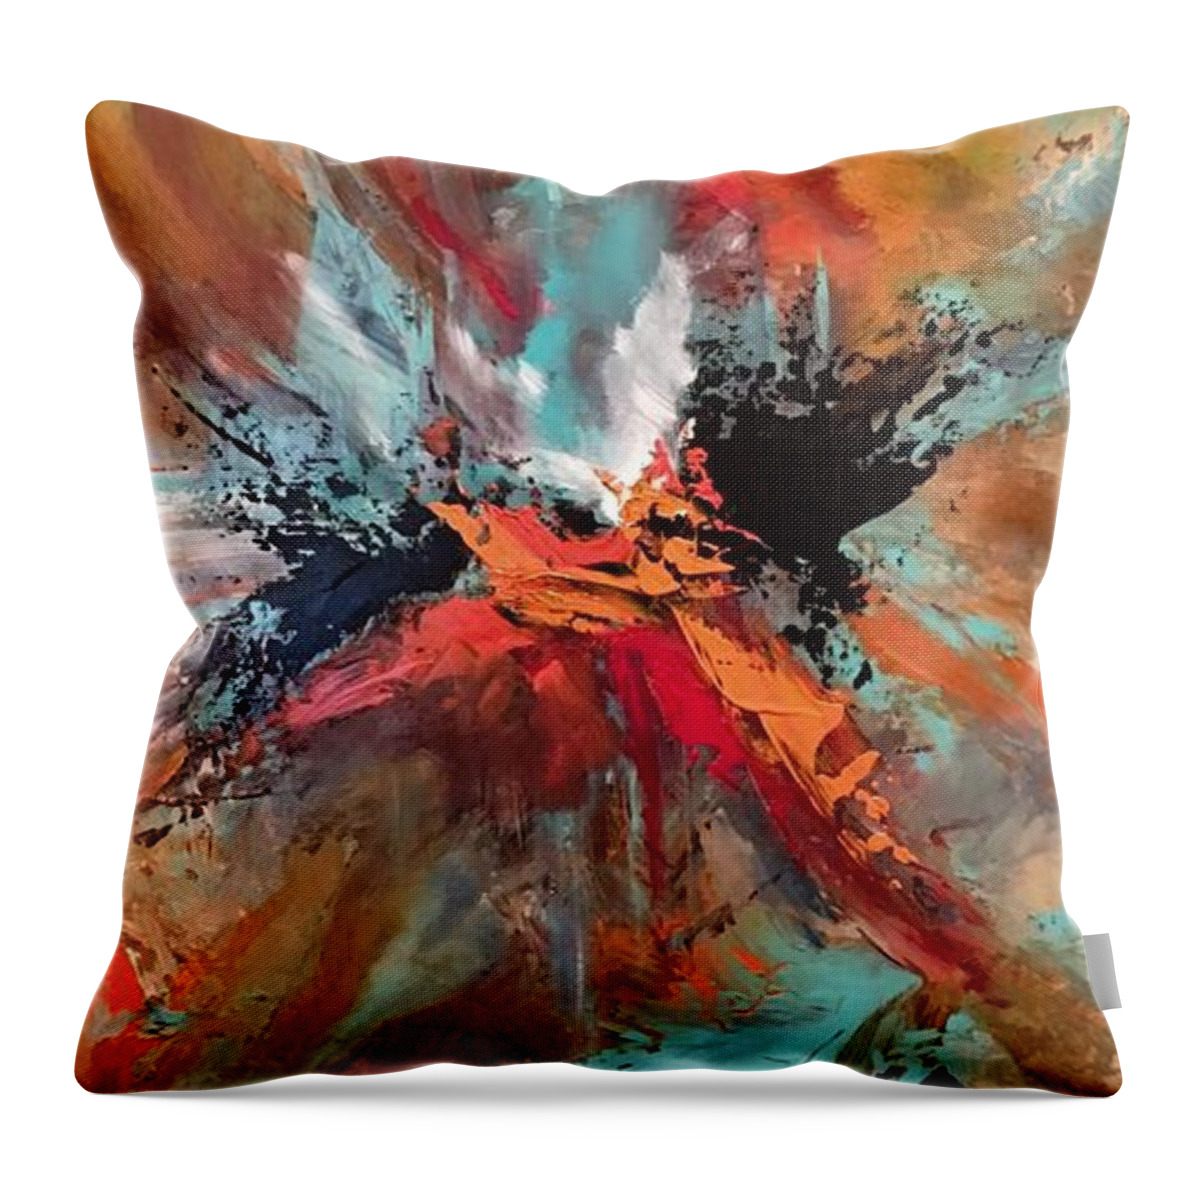 Abstract Throw Pillow featuring the painting Intrepid by Soraya Silvestri